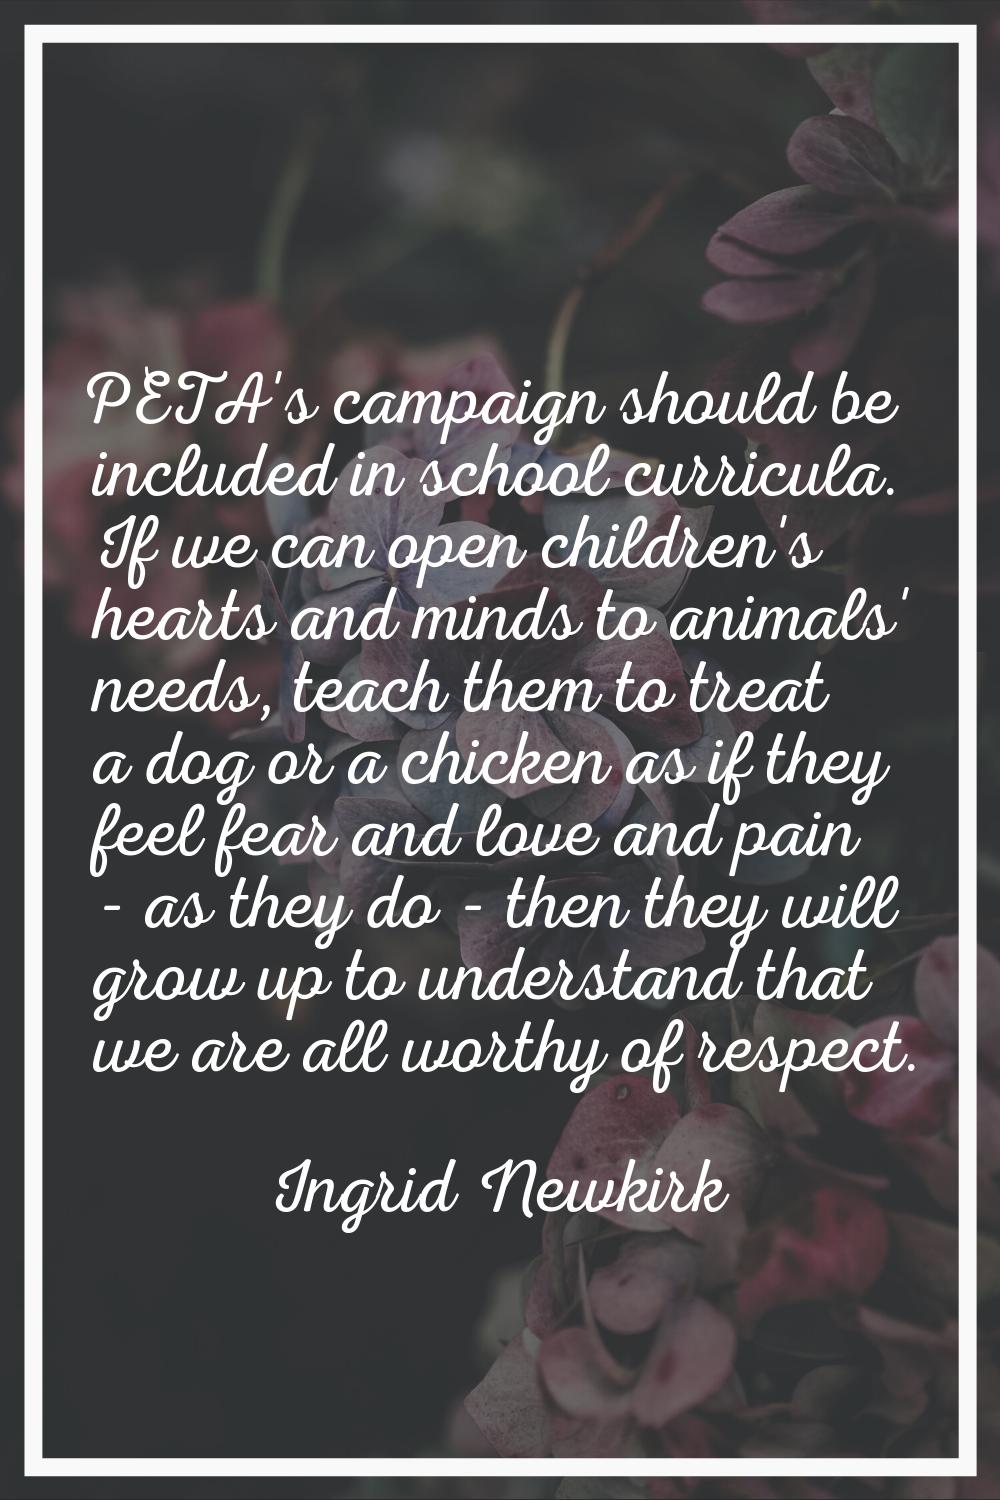 PETA's campaign should be included in school curricula. If we can open children's hearts and minds 